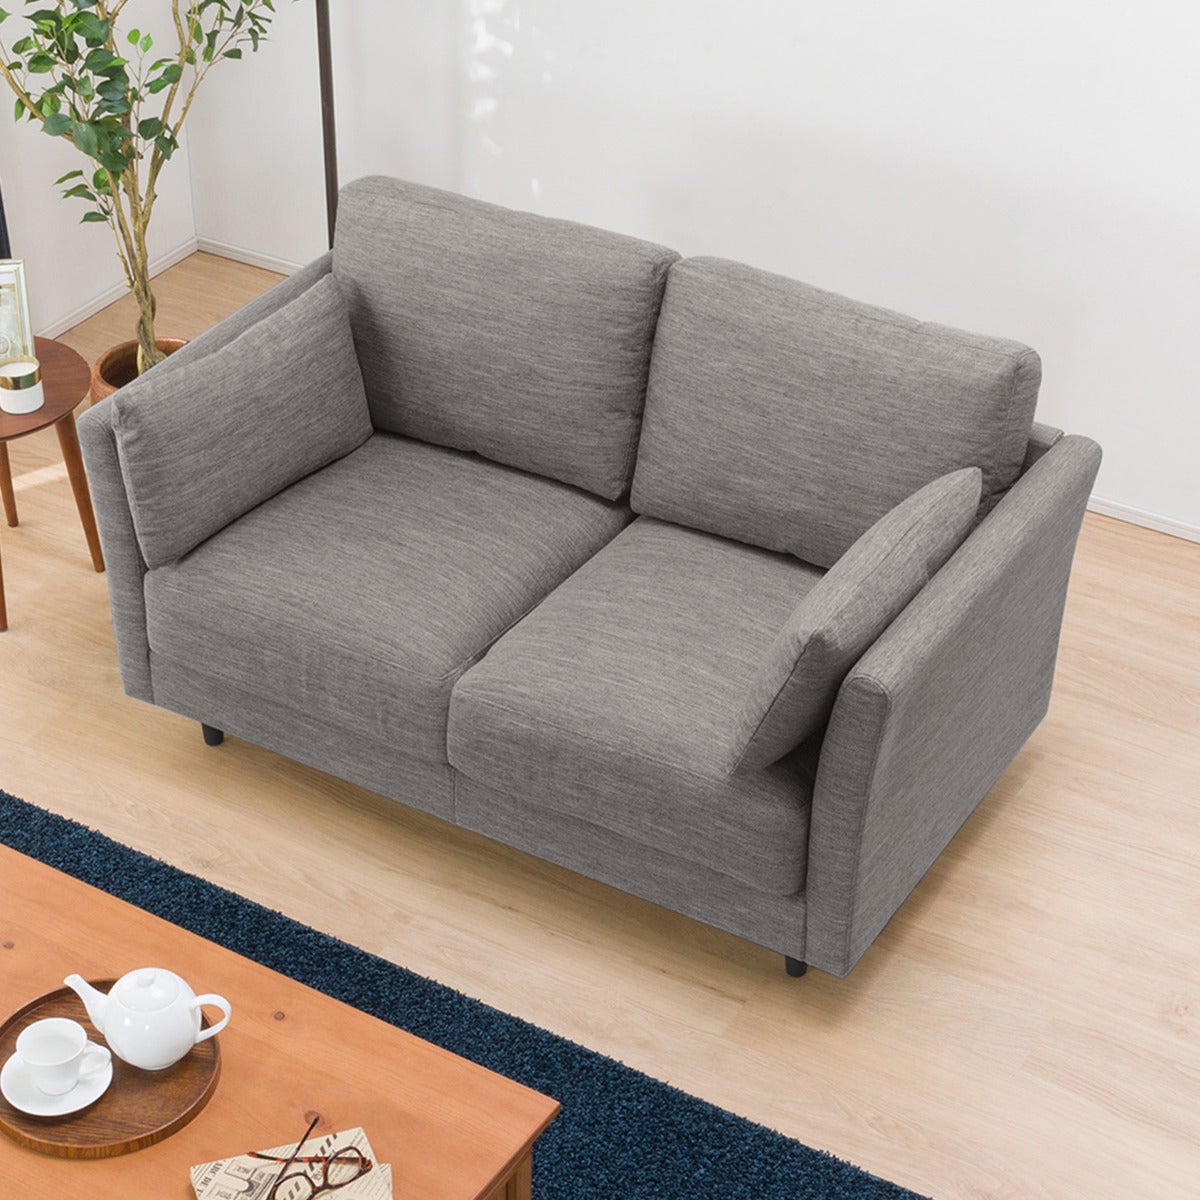 2 SEAT SOFA CA10 DR-GY